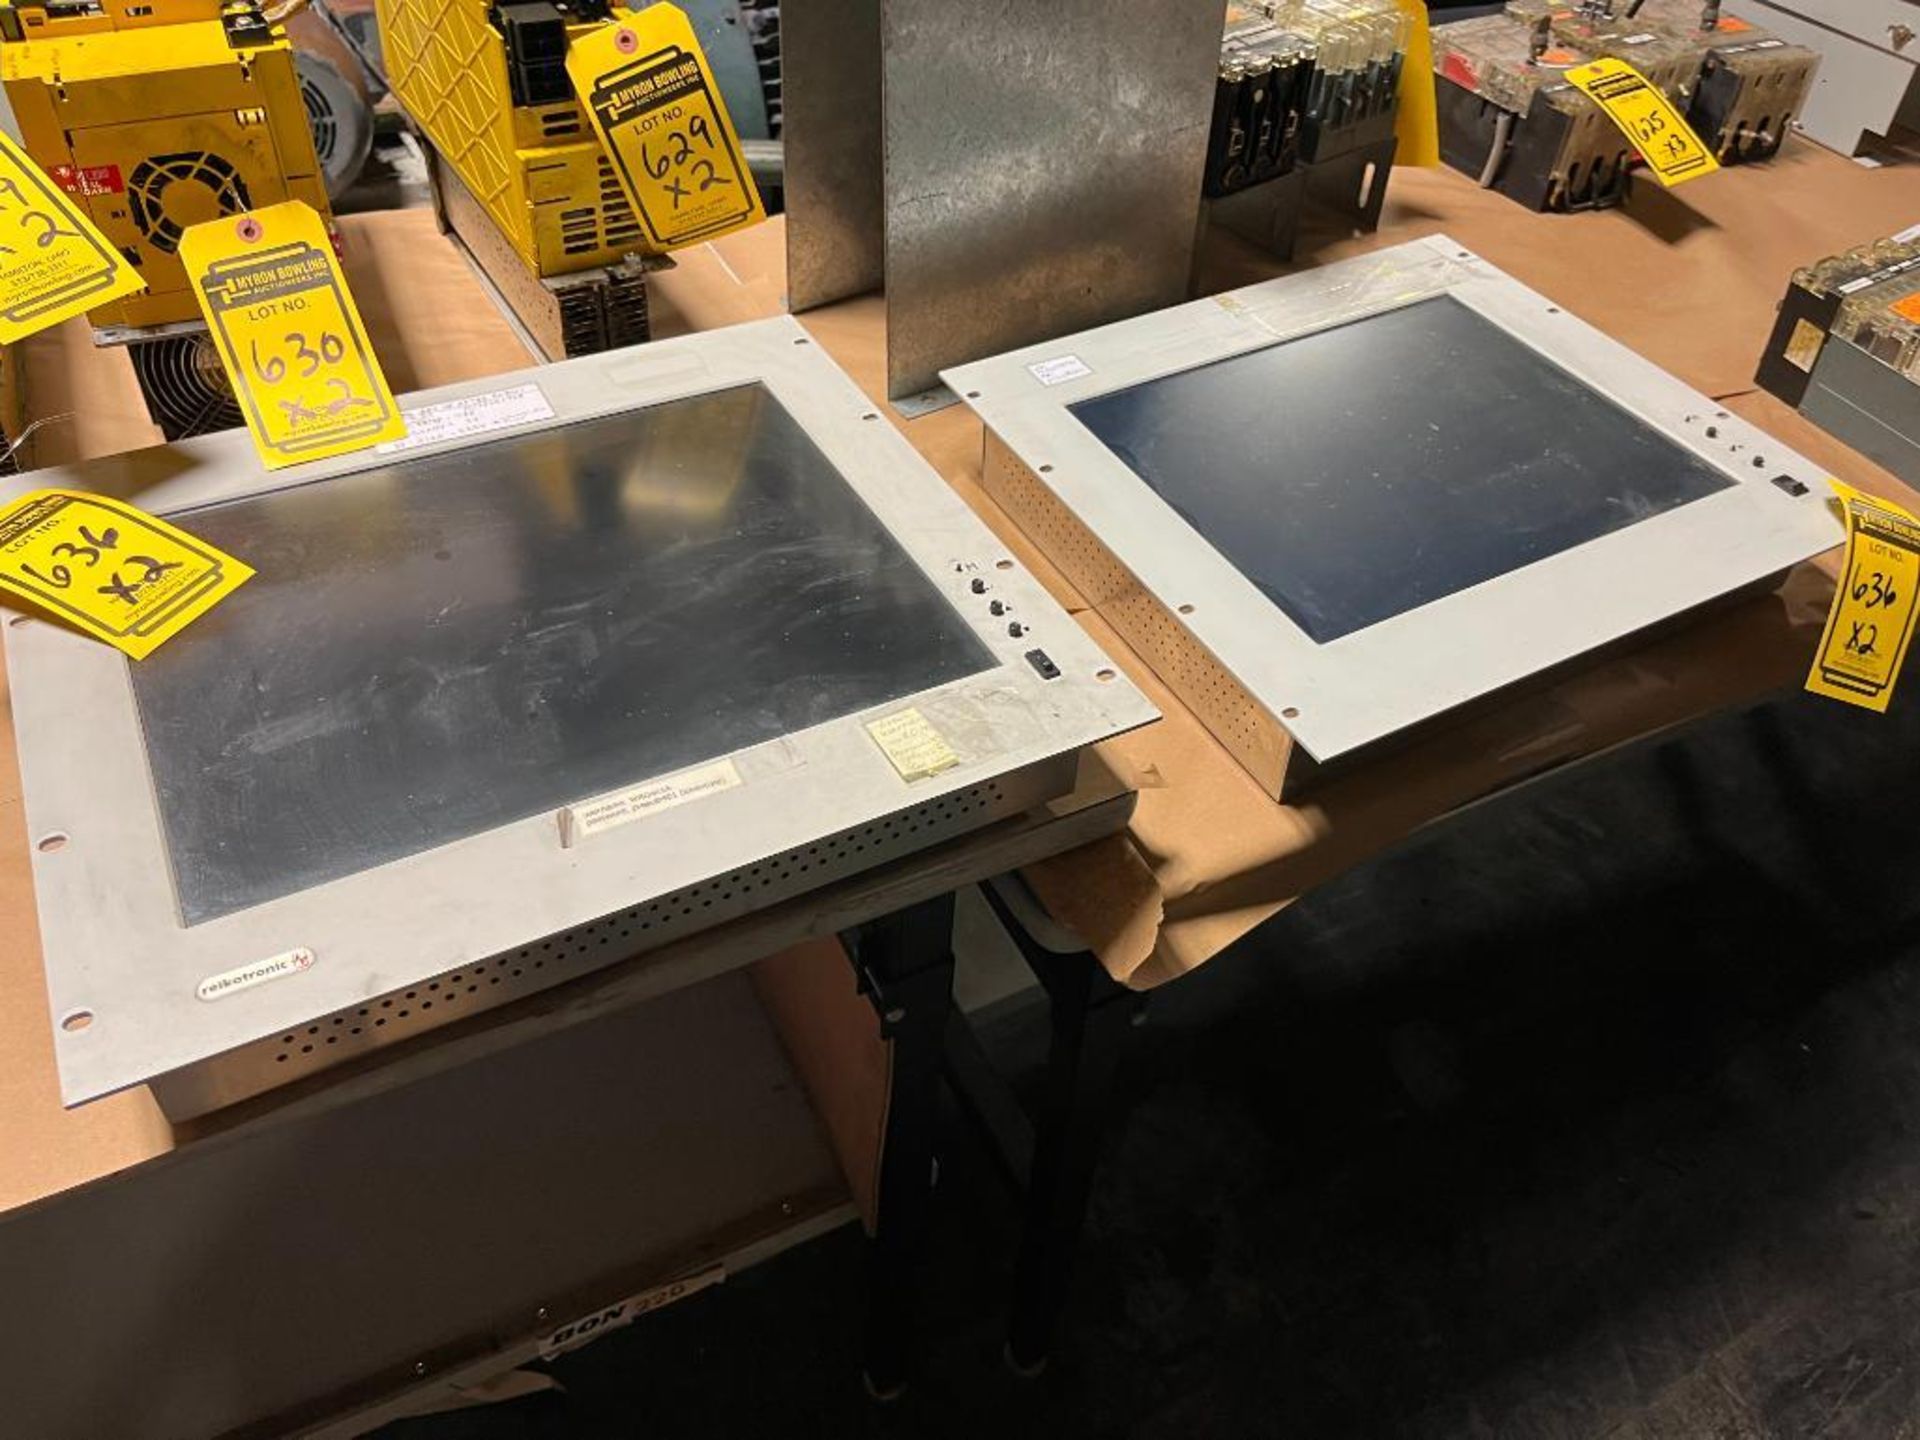 (2x) Reikotronic Touch Screen Monitors